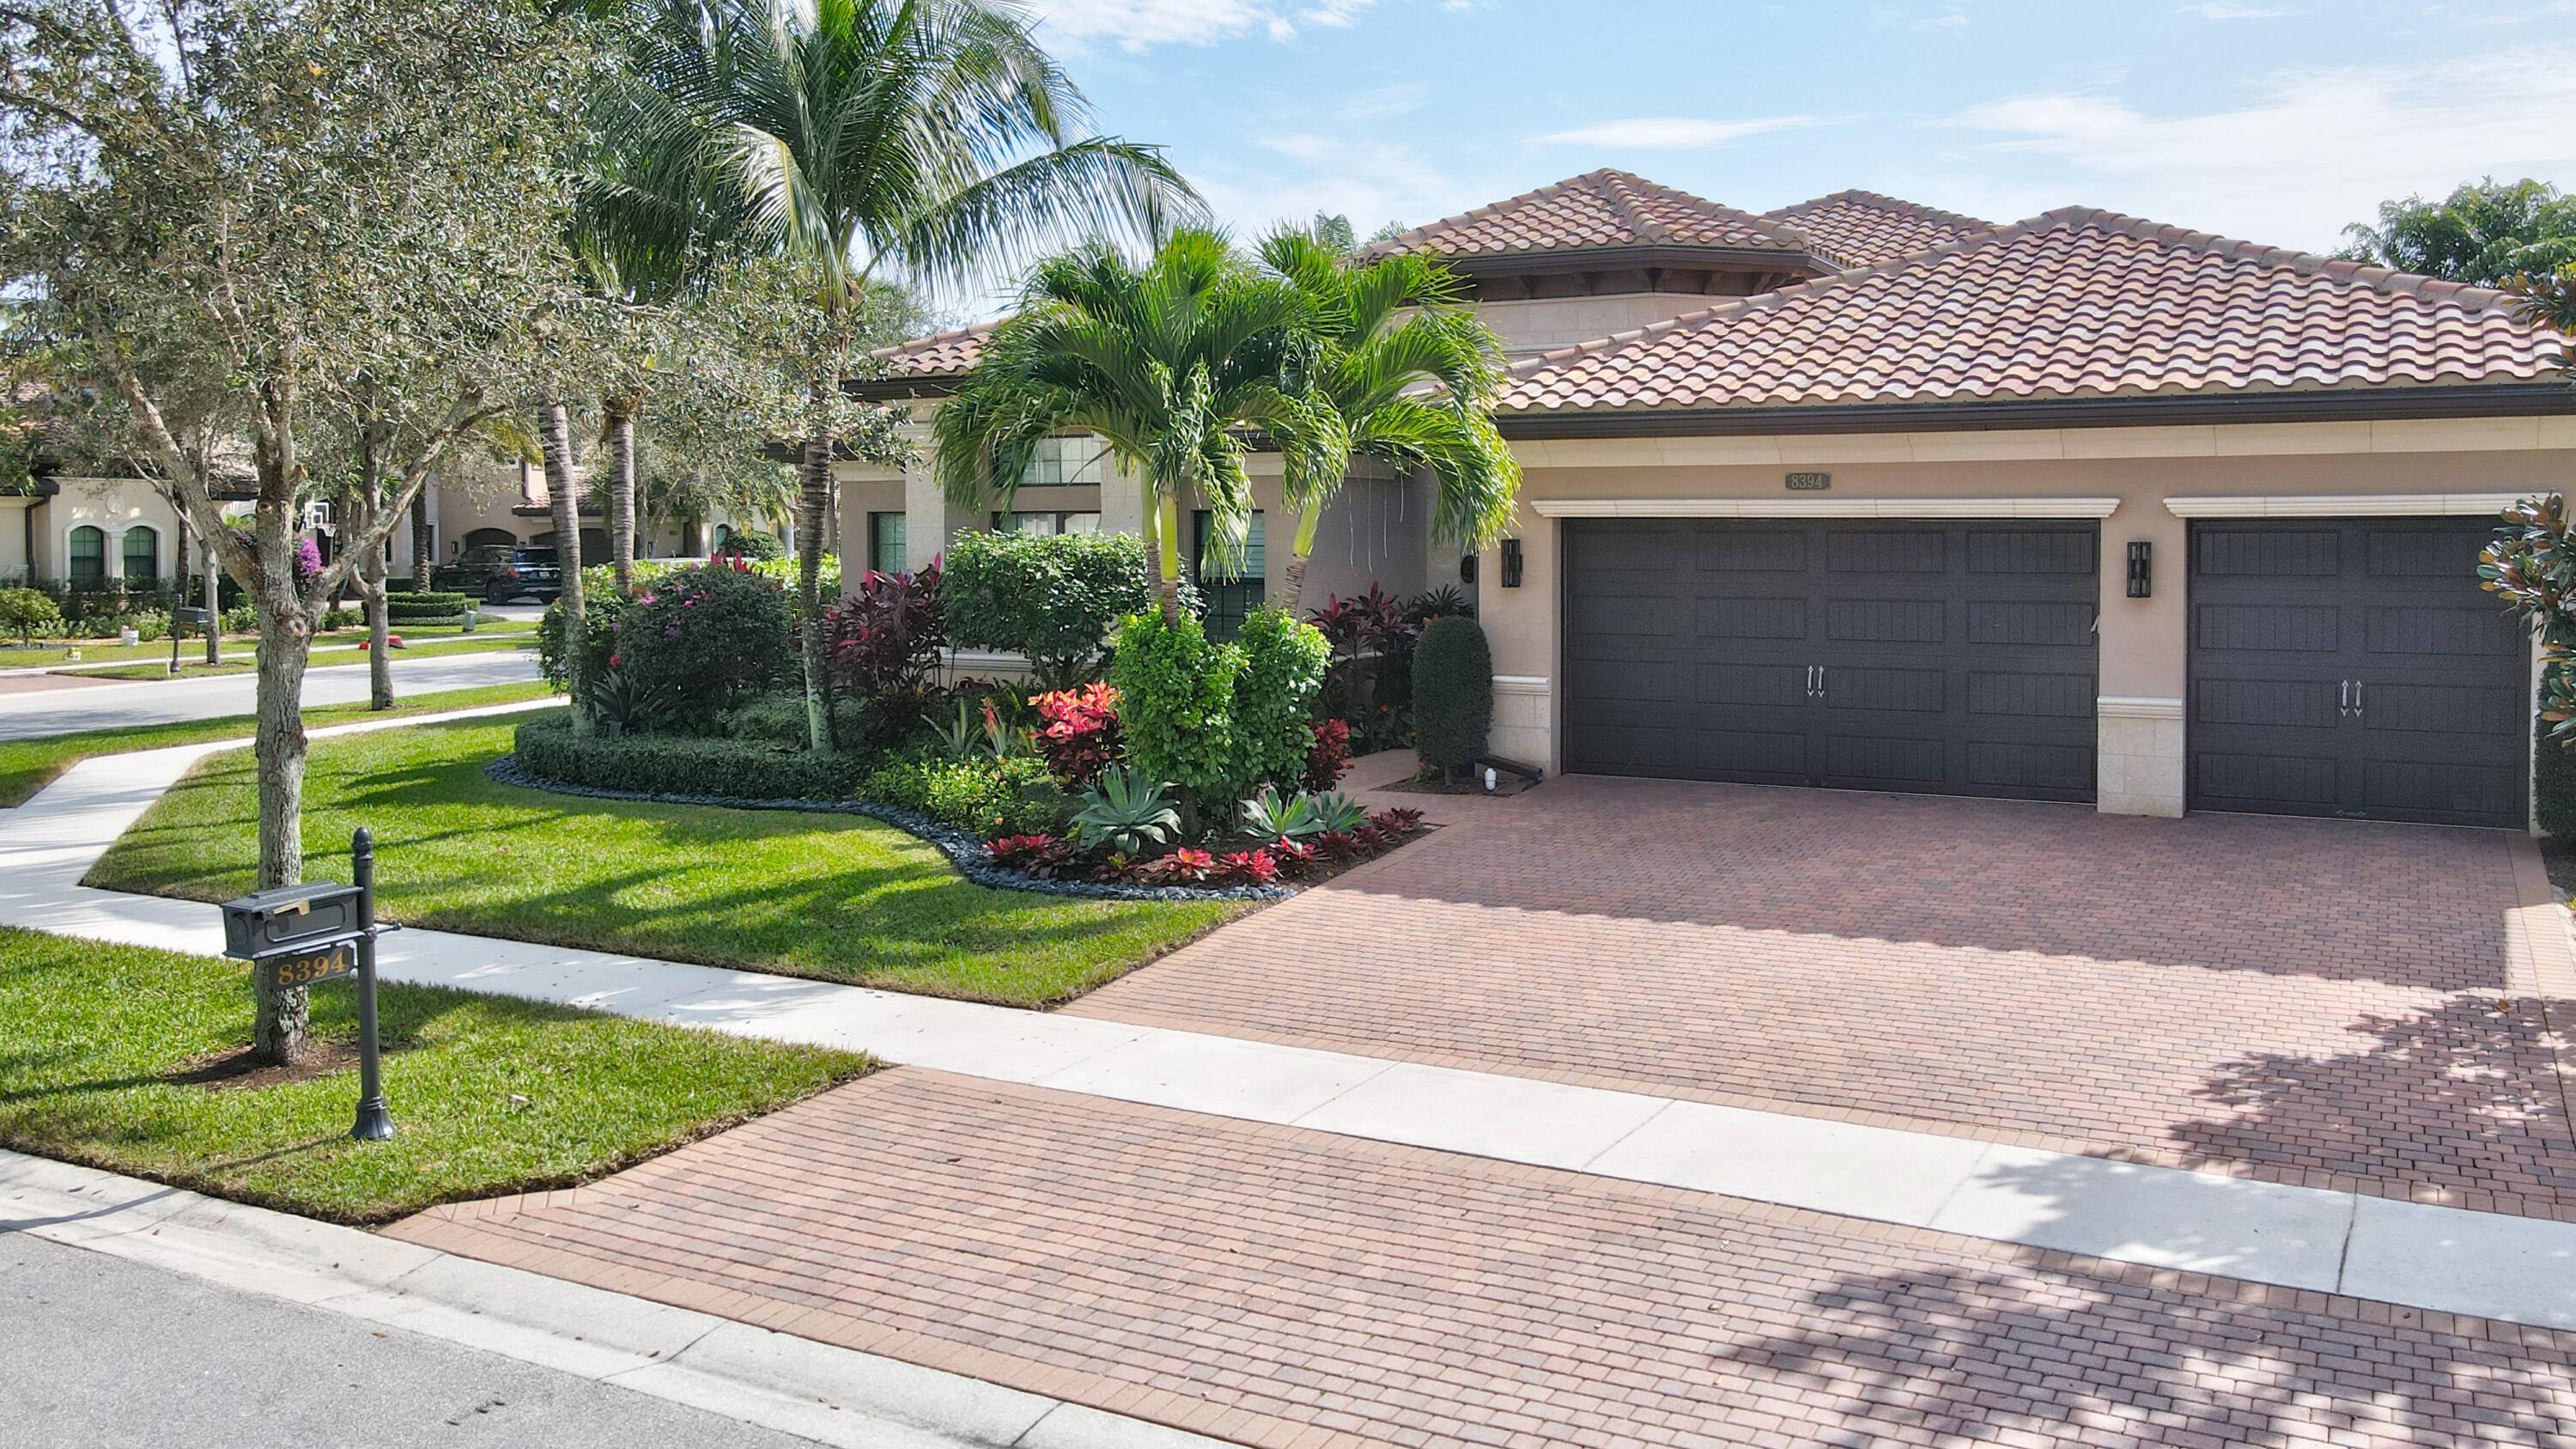 ONE OF A KIND VENETIAN MODEL SITUATED ON A LUSHLY LANDSCAPED CORNER LOT OVER 1 3 ACRE.